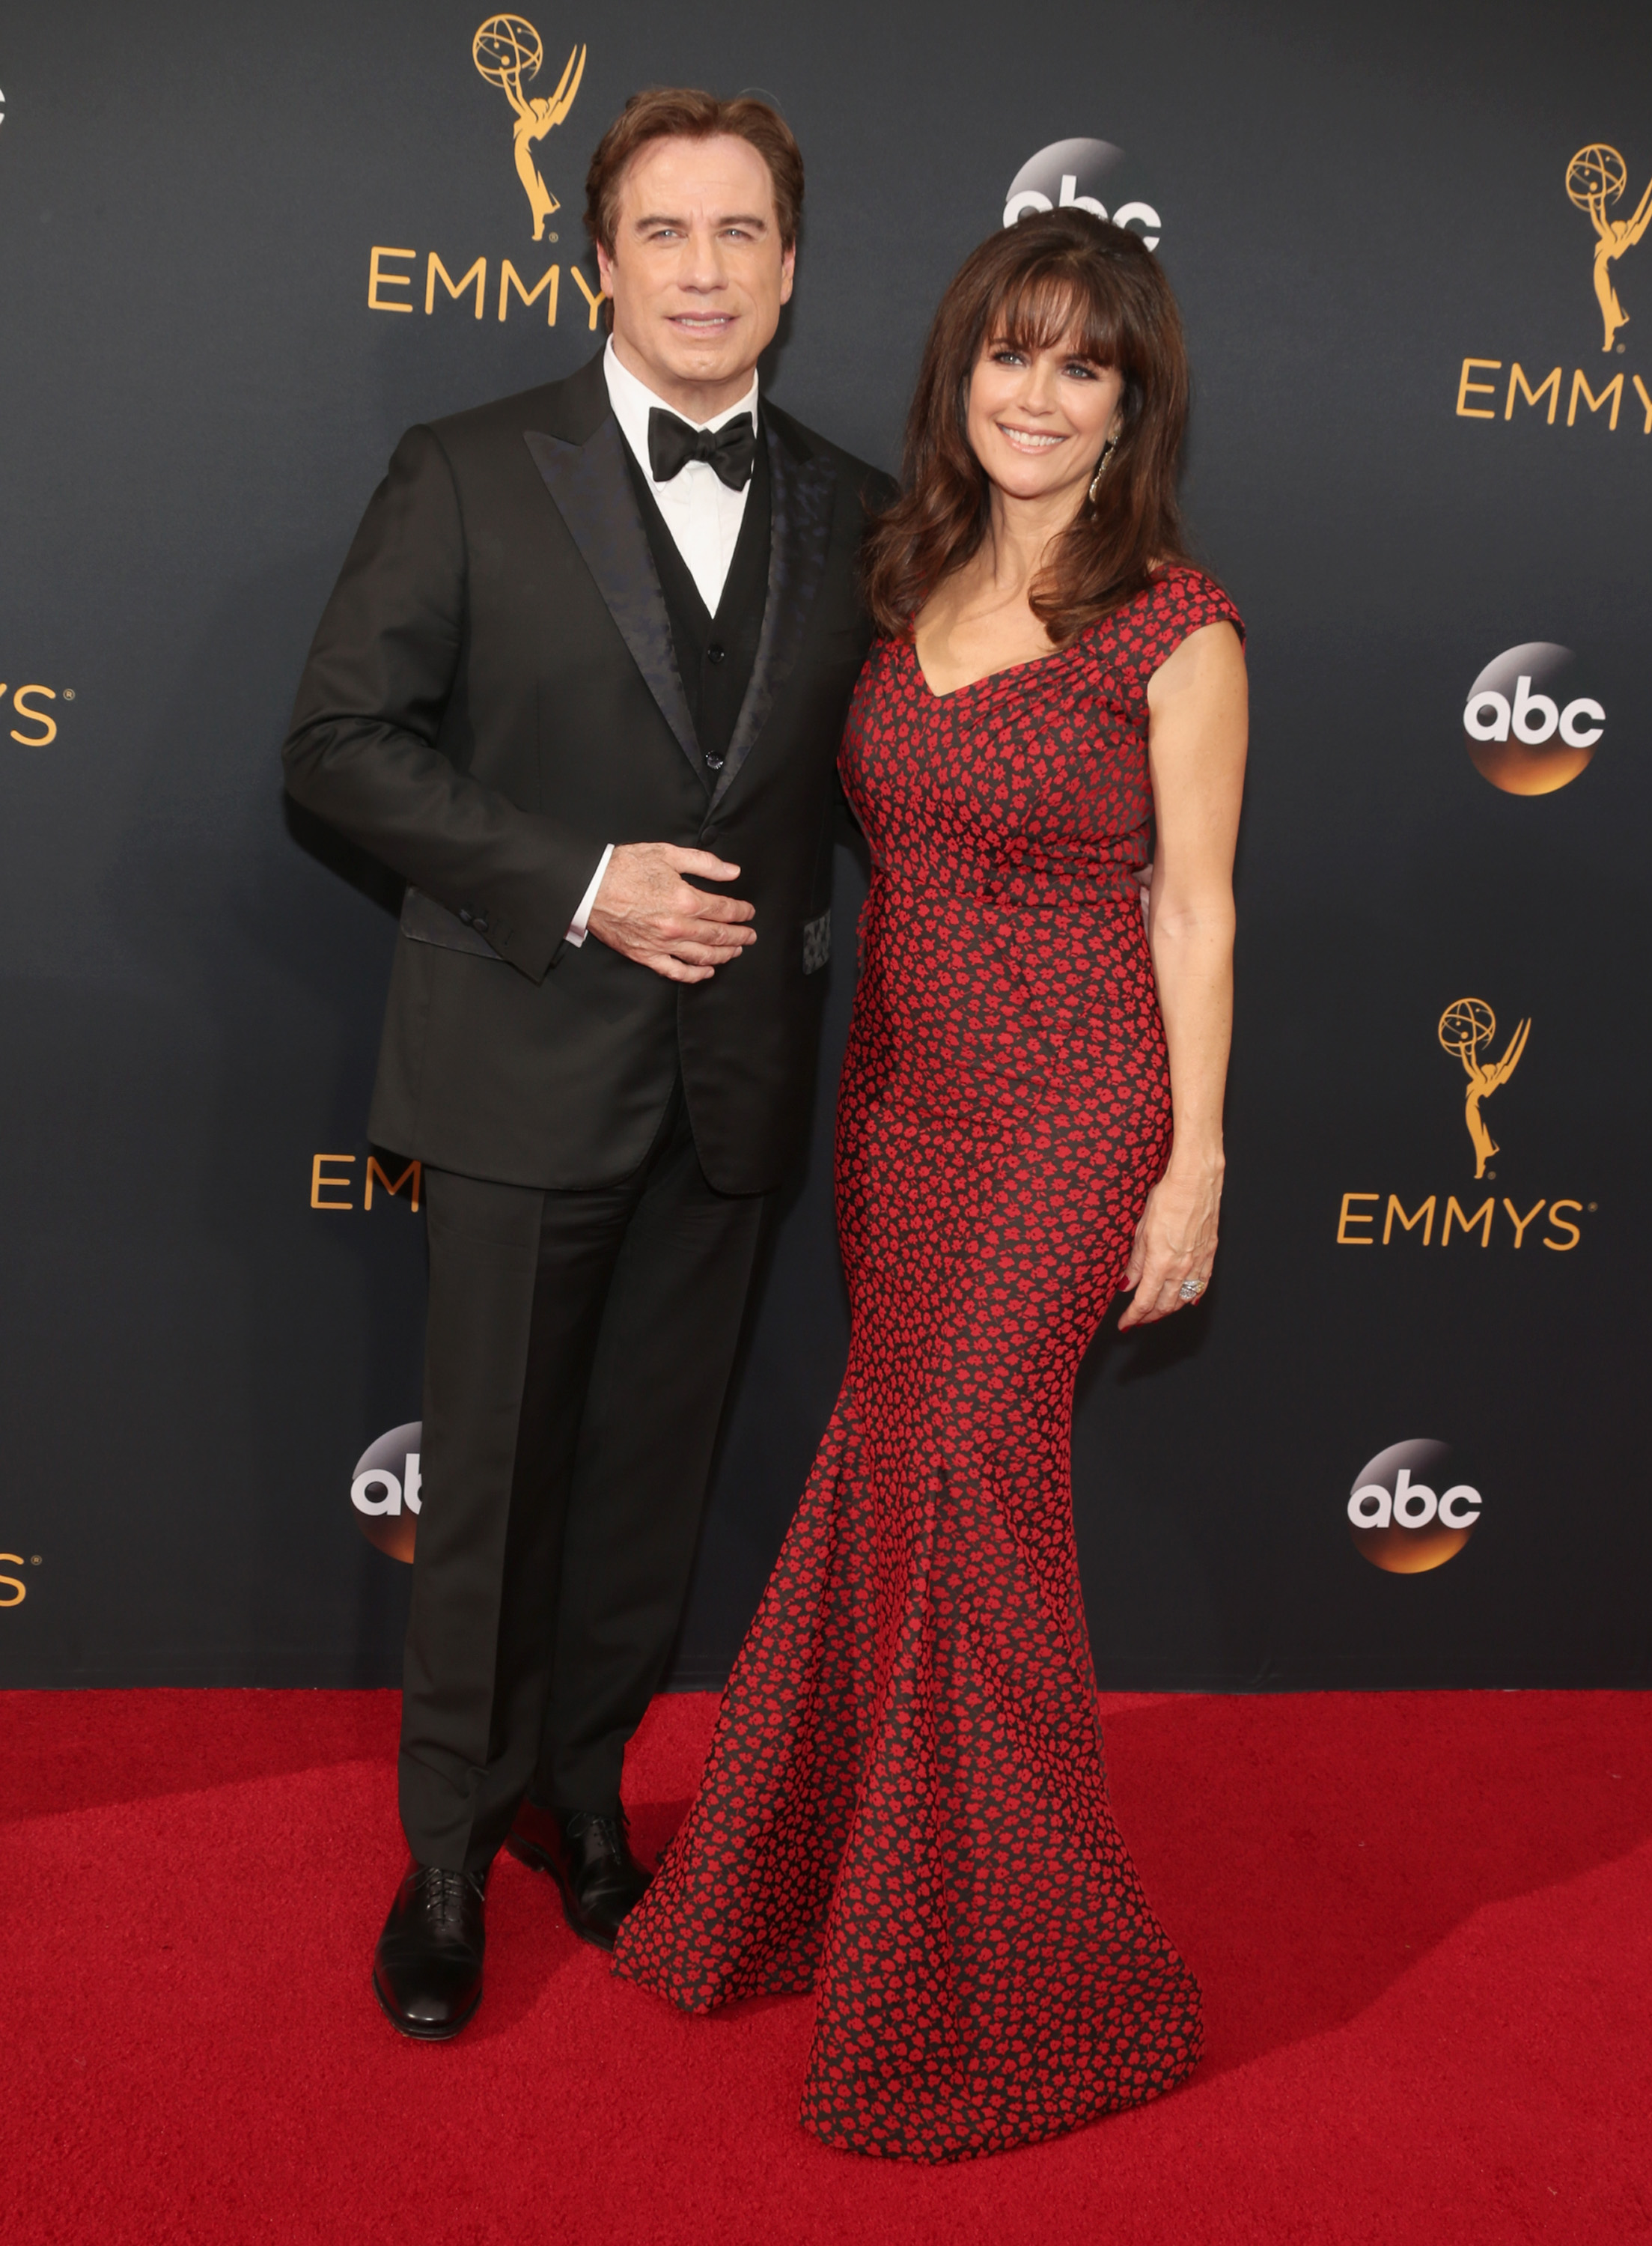 John Travolta and Kelly Preston arrive at the 68th Annual Primetime Emmy Awards at Microsoft Theater on September 18, 2016 in Los Angeles.